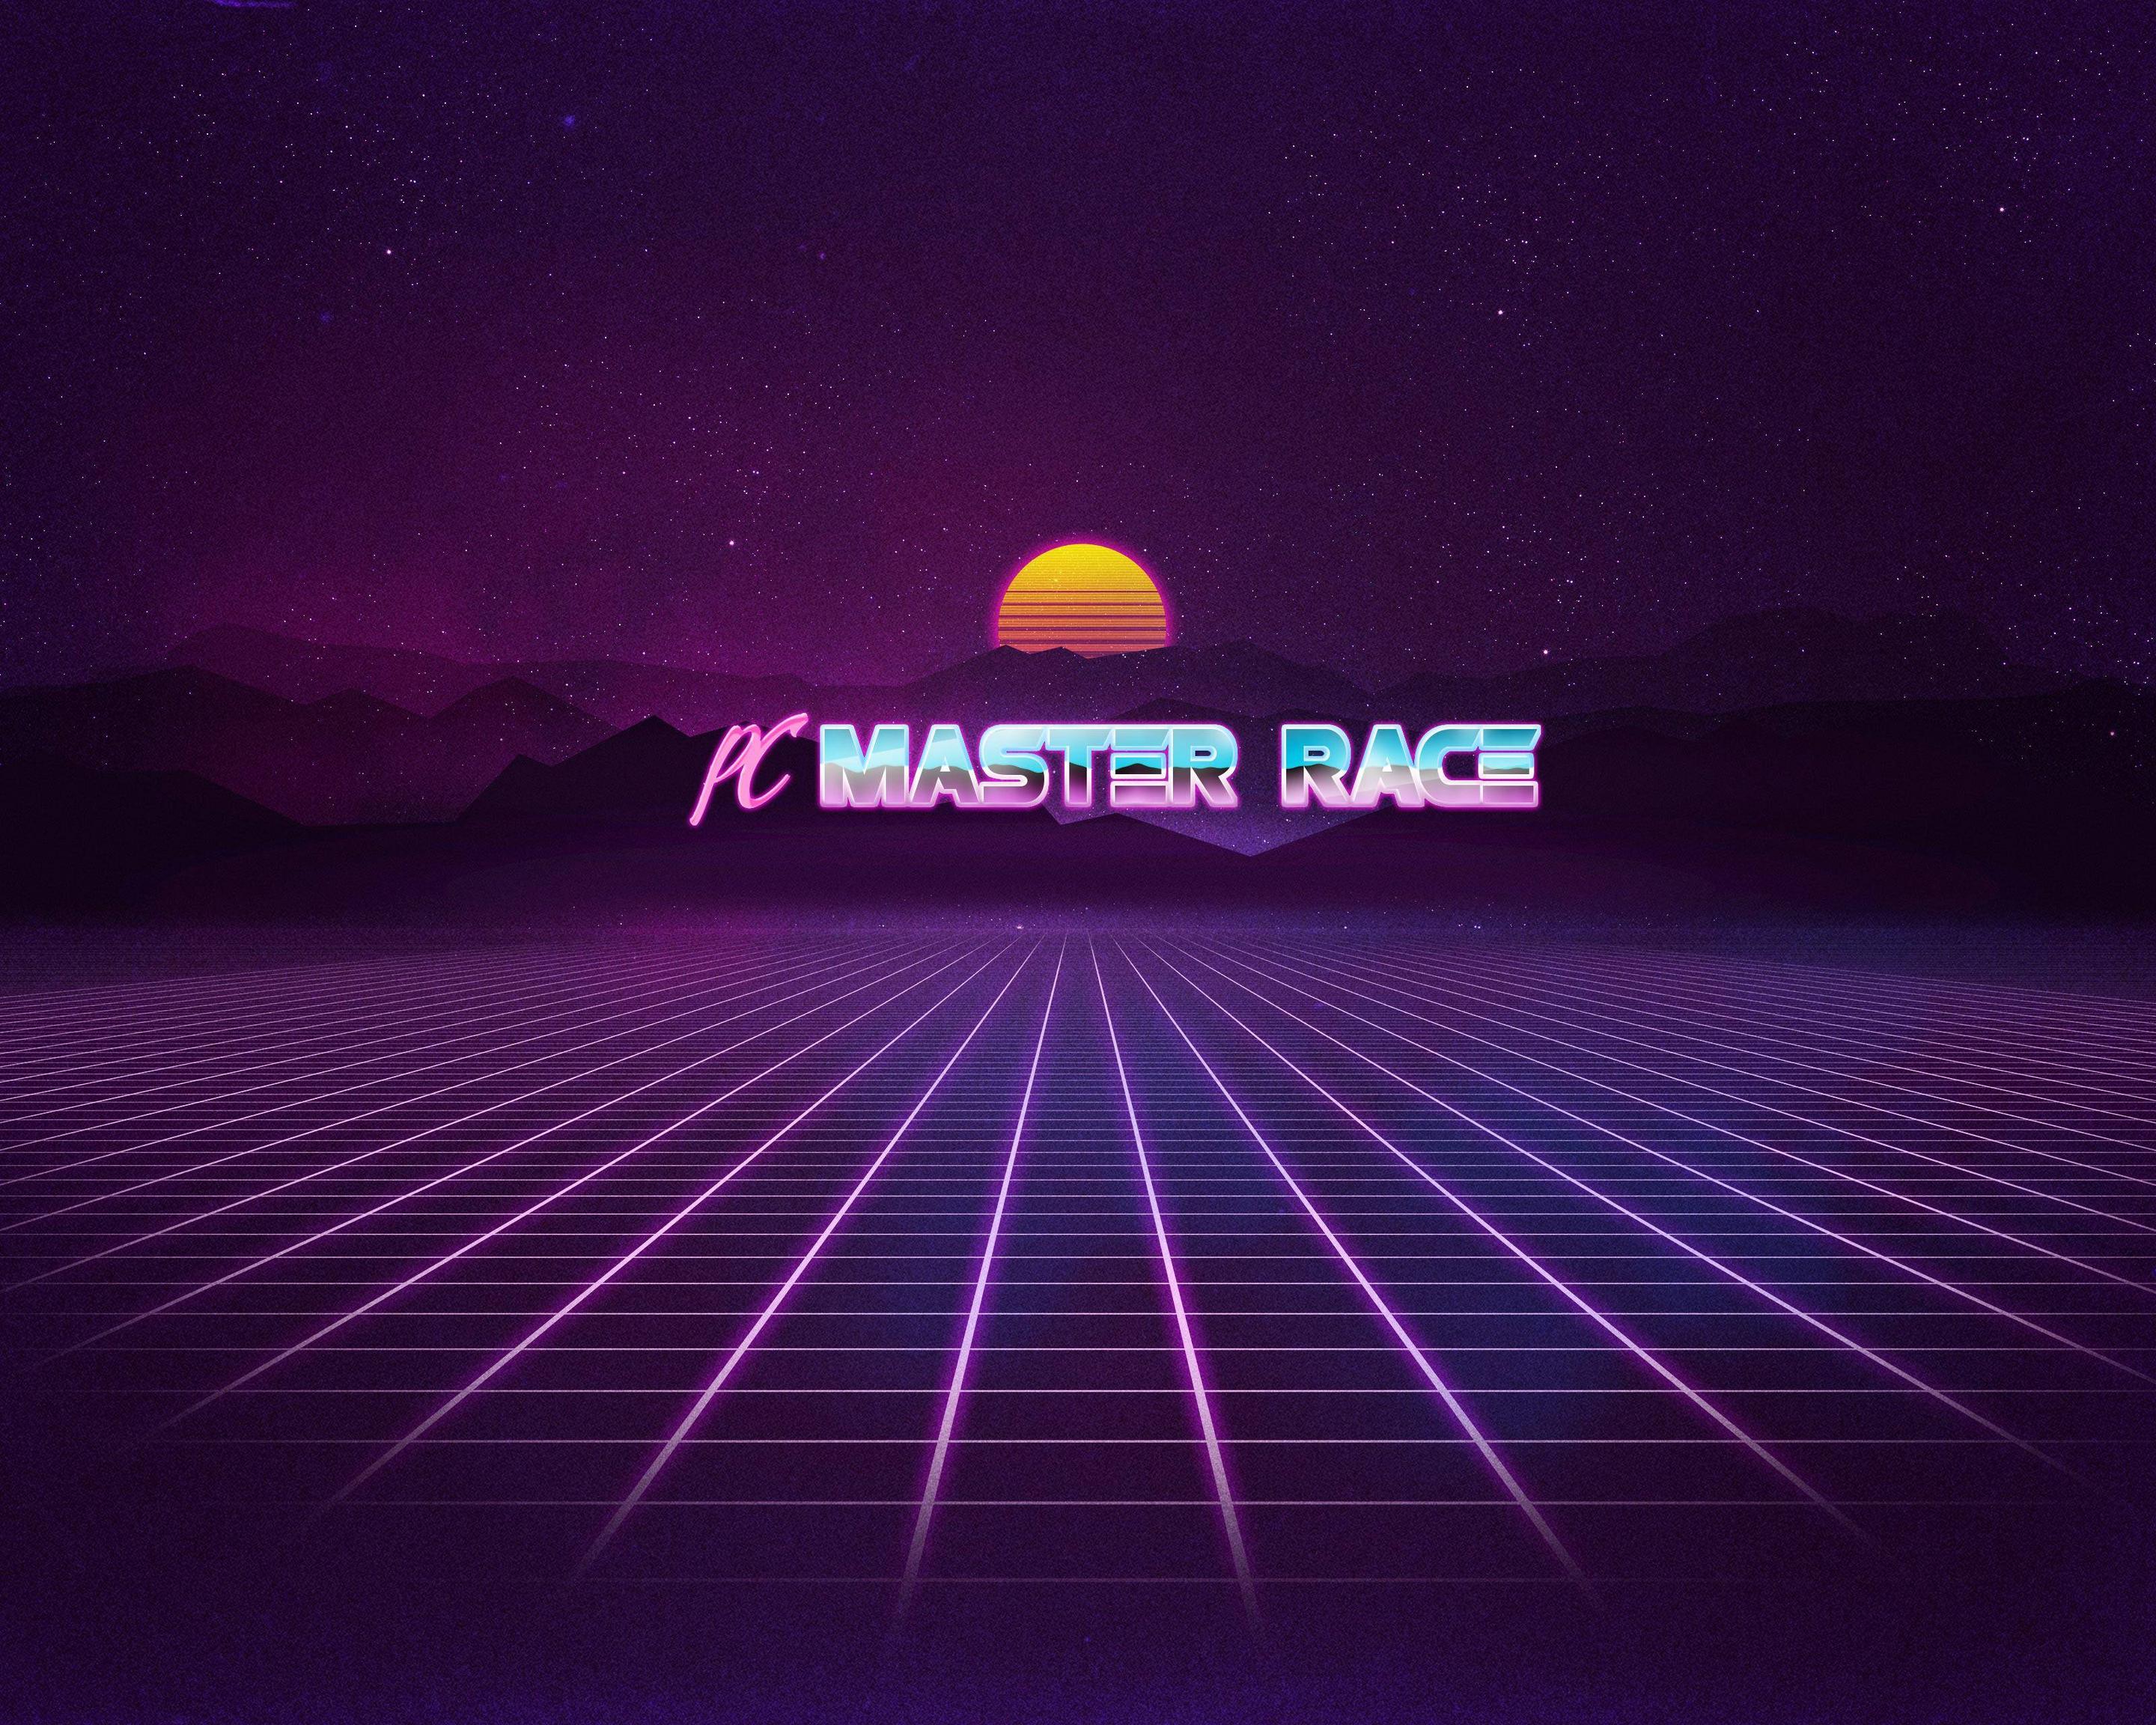 Made this 80s neon style wallpaper, thought I'd share it